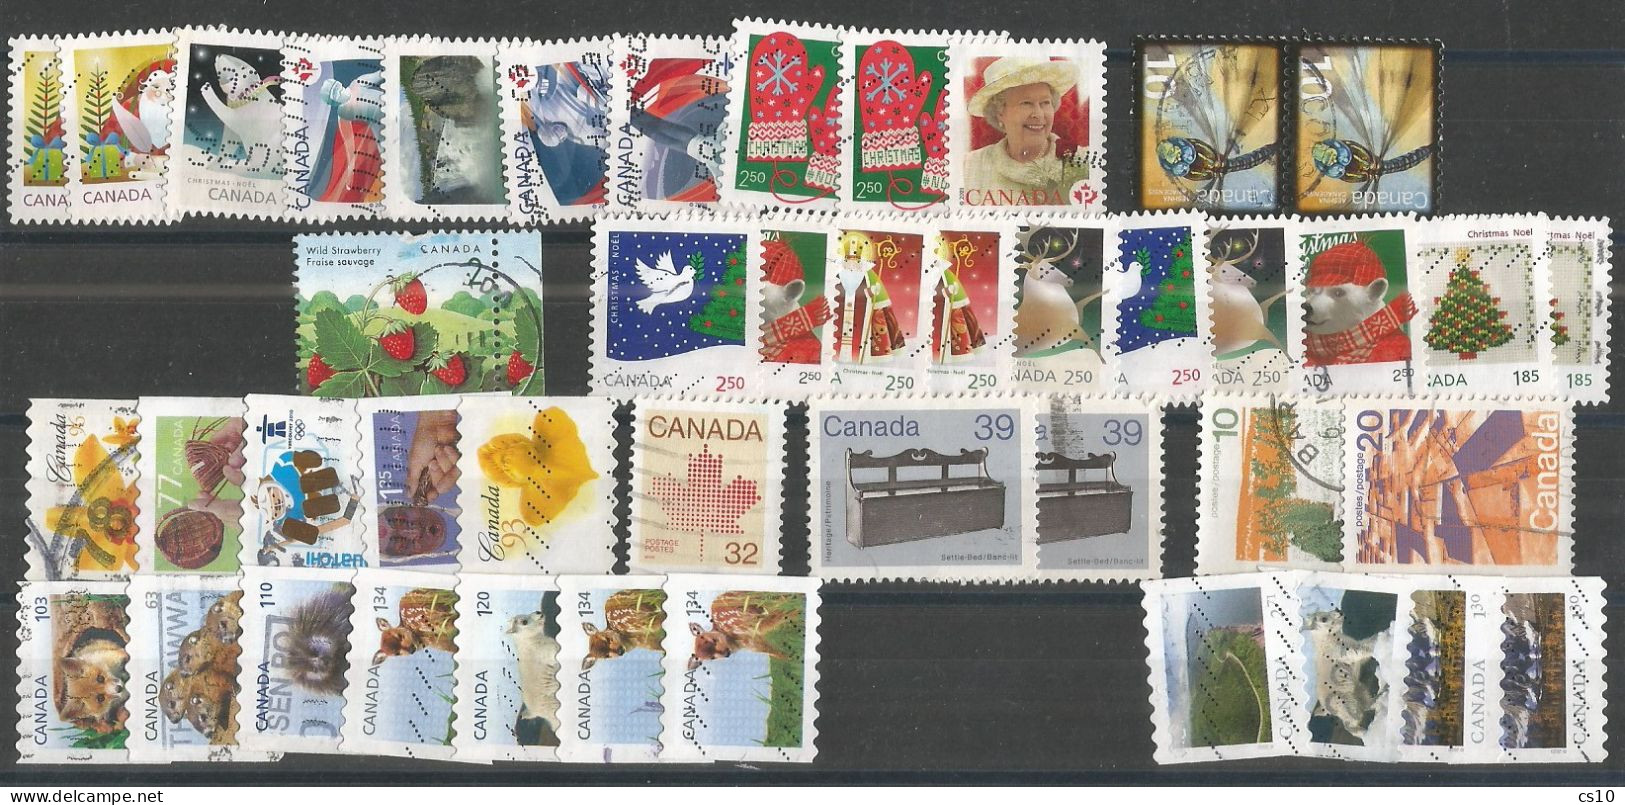 CANADA 12 scans Study lot Many Older issues with good values Panes blocks CvS etc